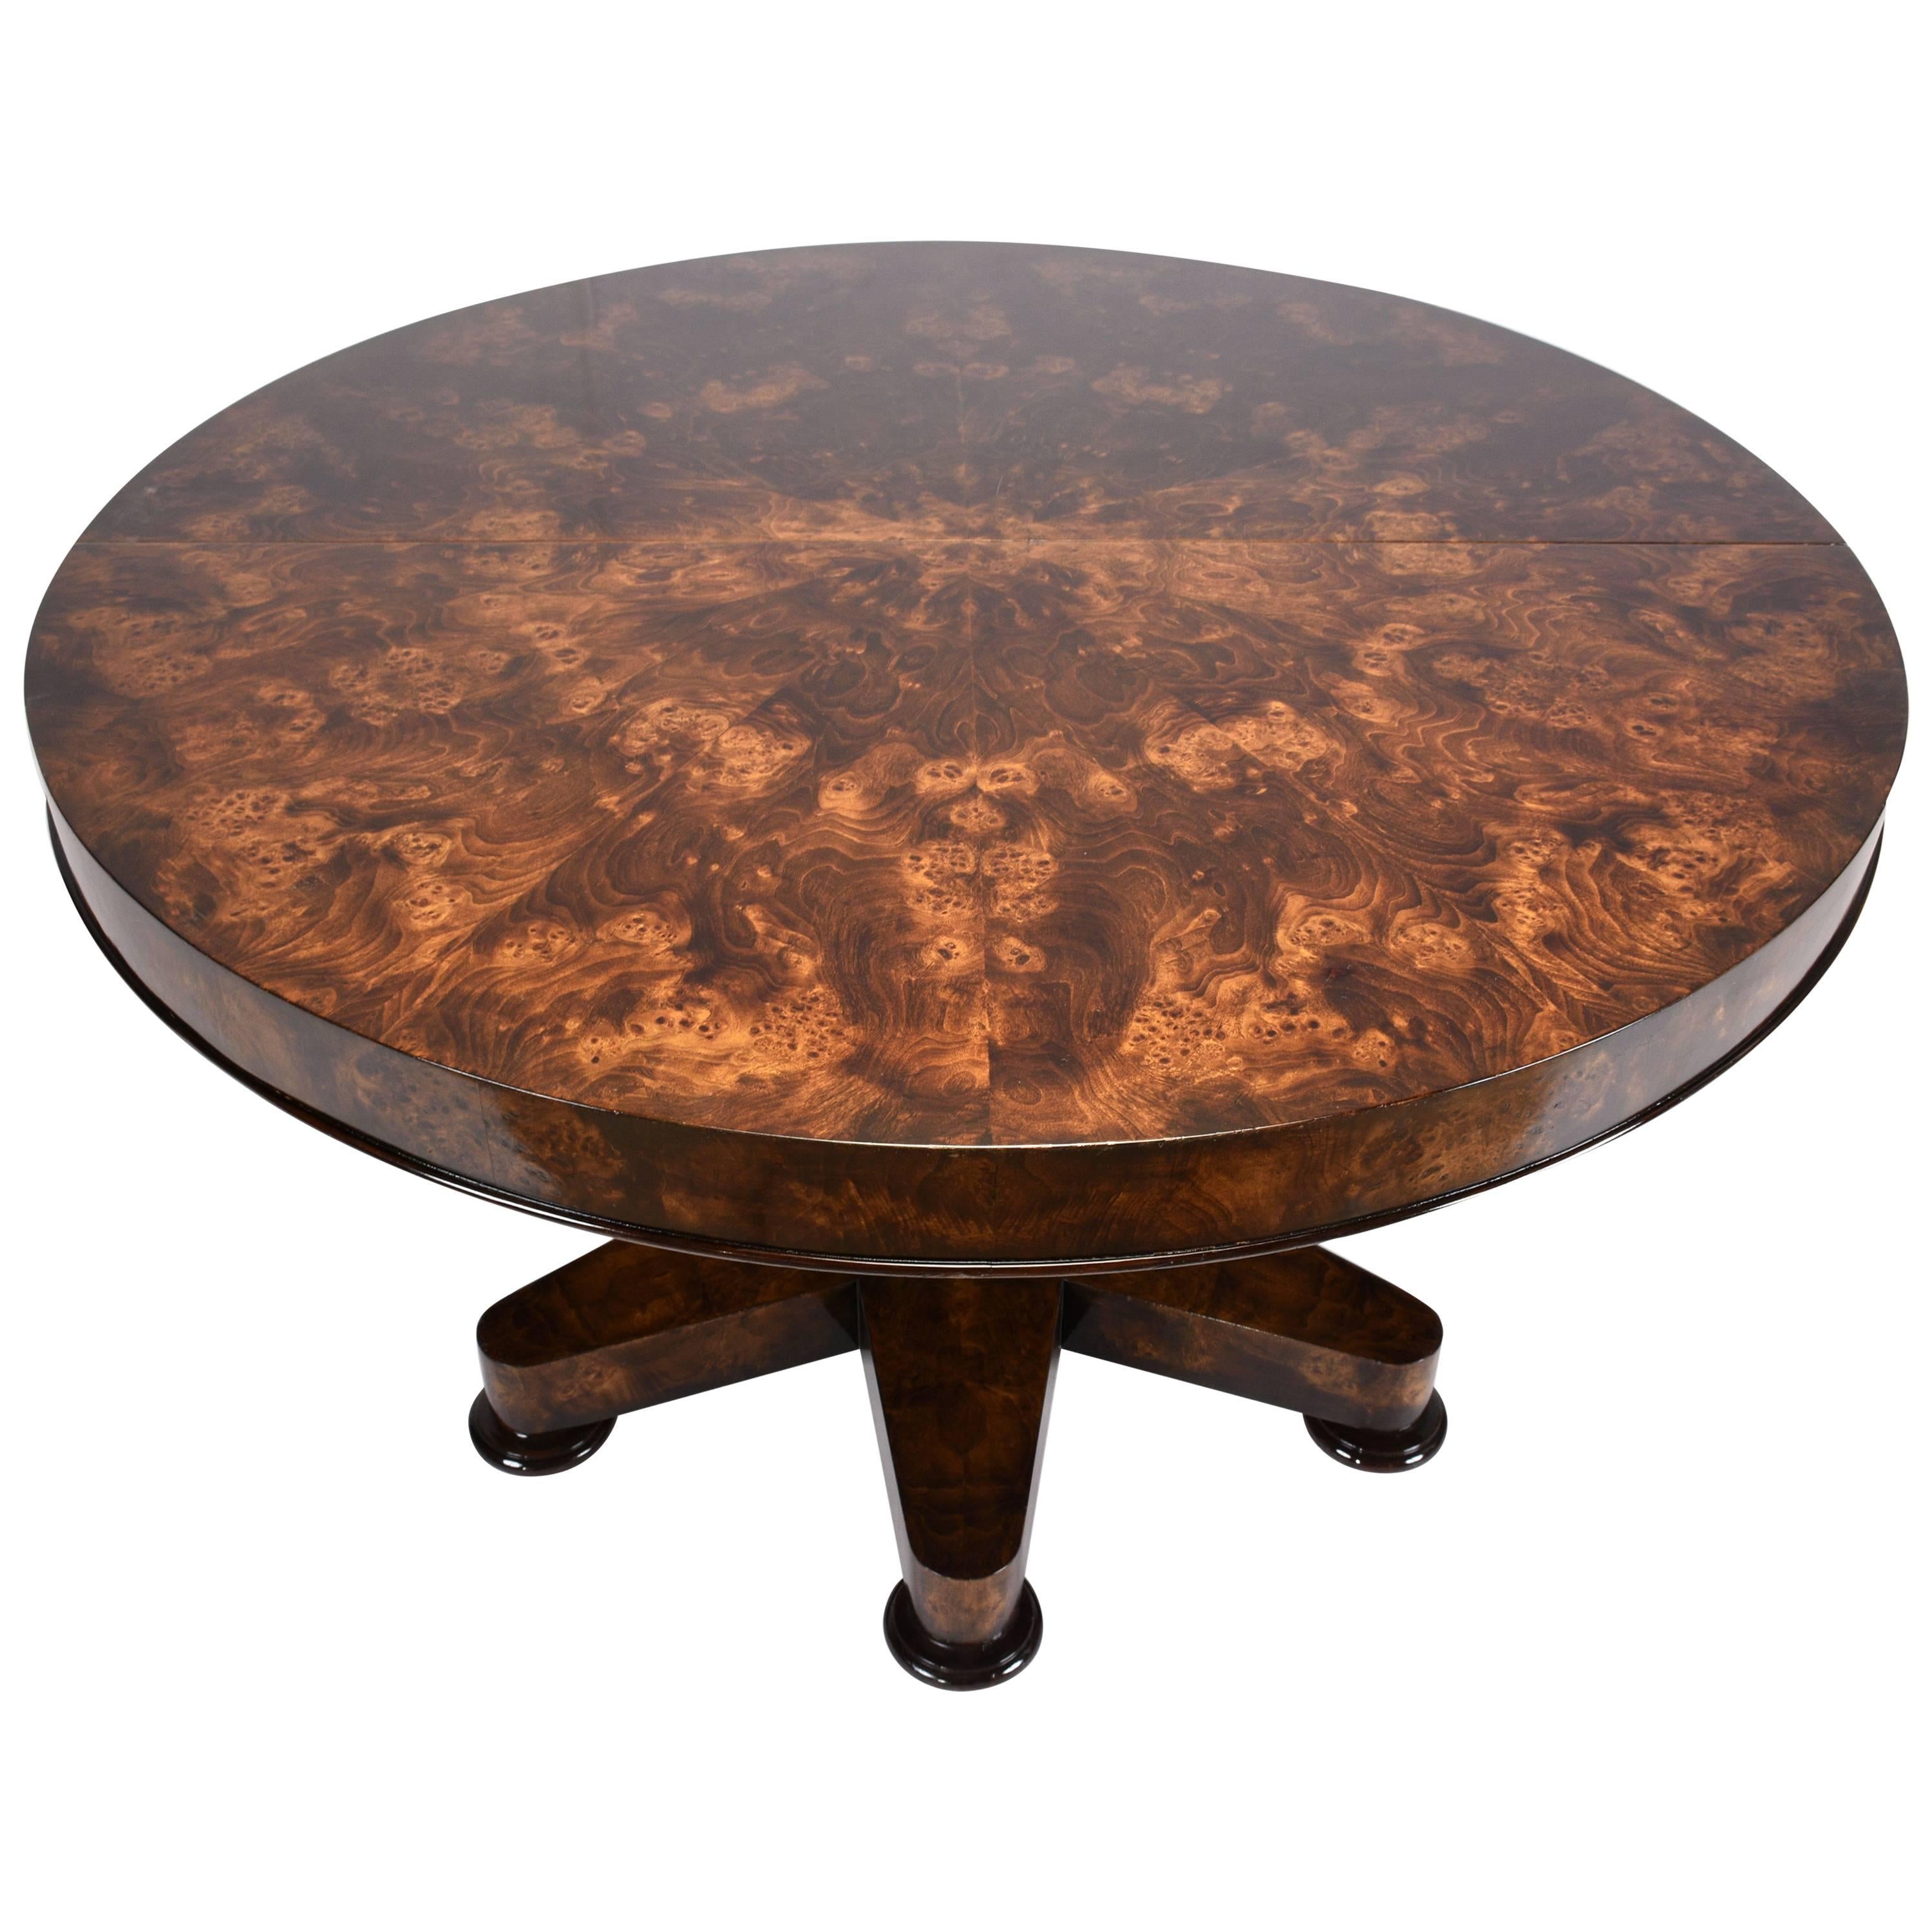 Regency-Style Round Burl Dining Table